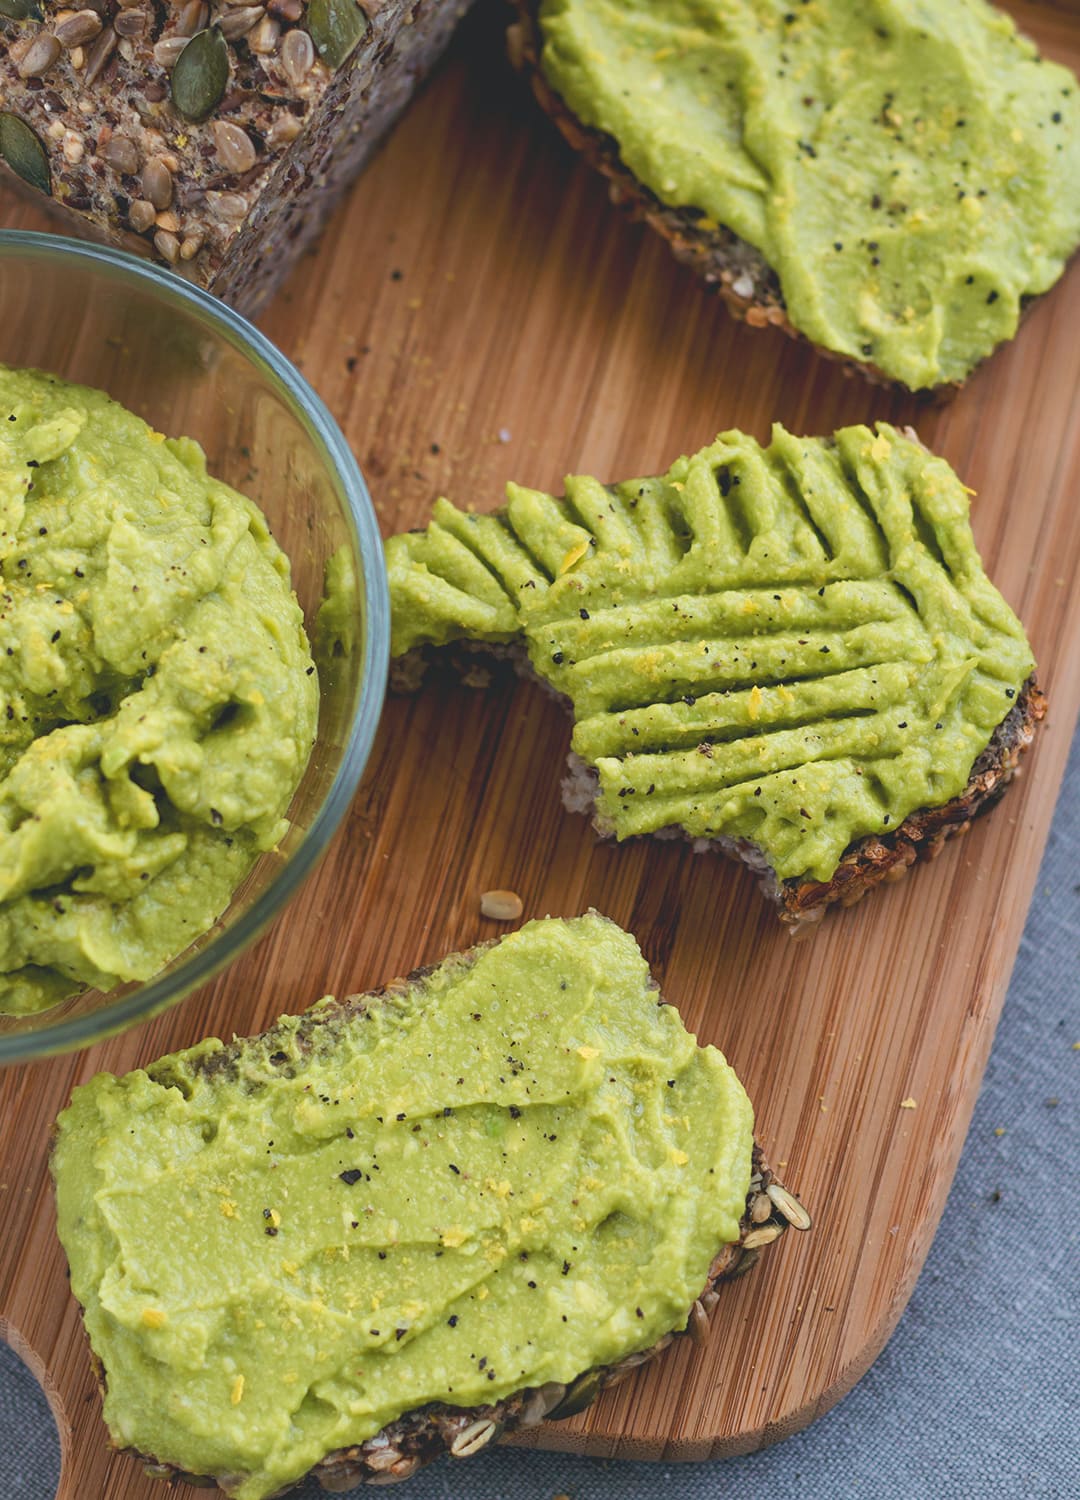 The Best Cheesy Vegan Avocado Spread - healthy and delicious spread you can whip up in a matter of minutes. I love this recipe! Avocado, nutritional yeast, and spices - nothing more! vegan & gluten-free | thehealthfulideas.com